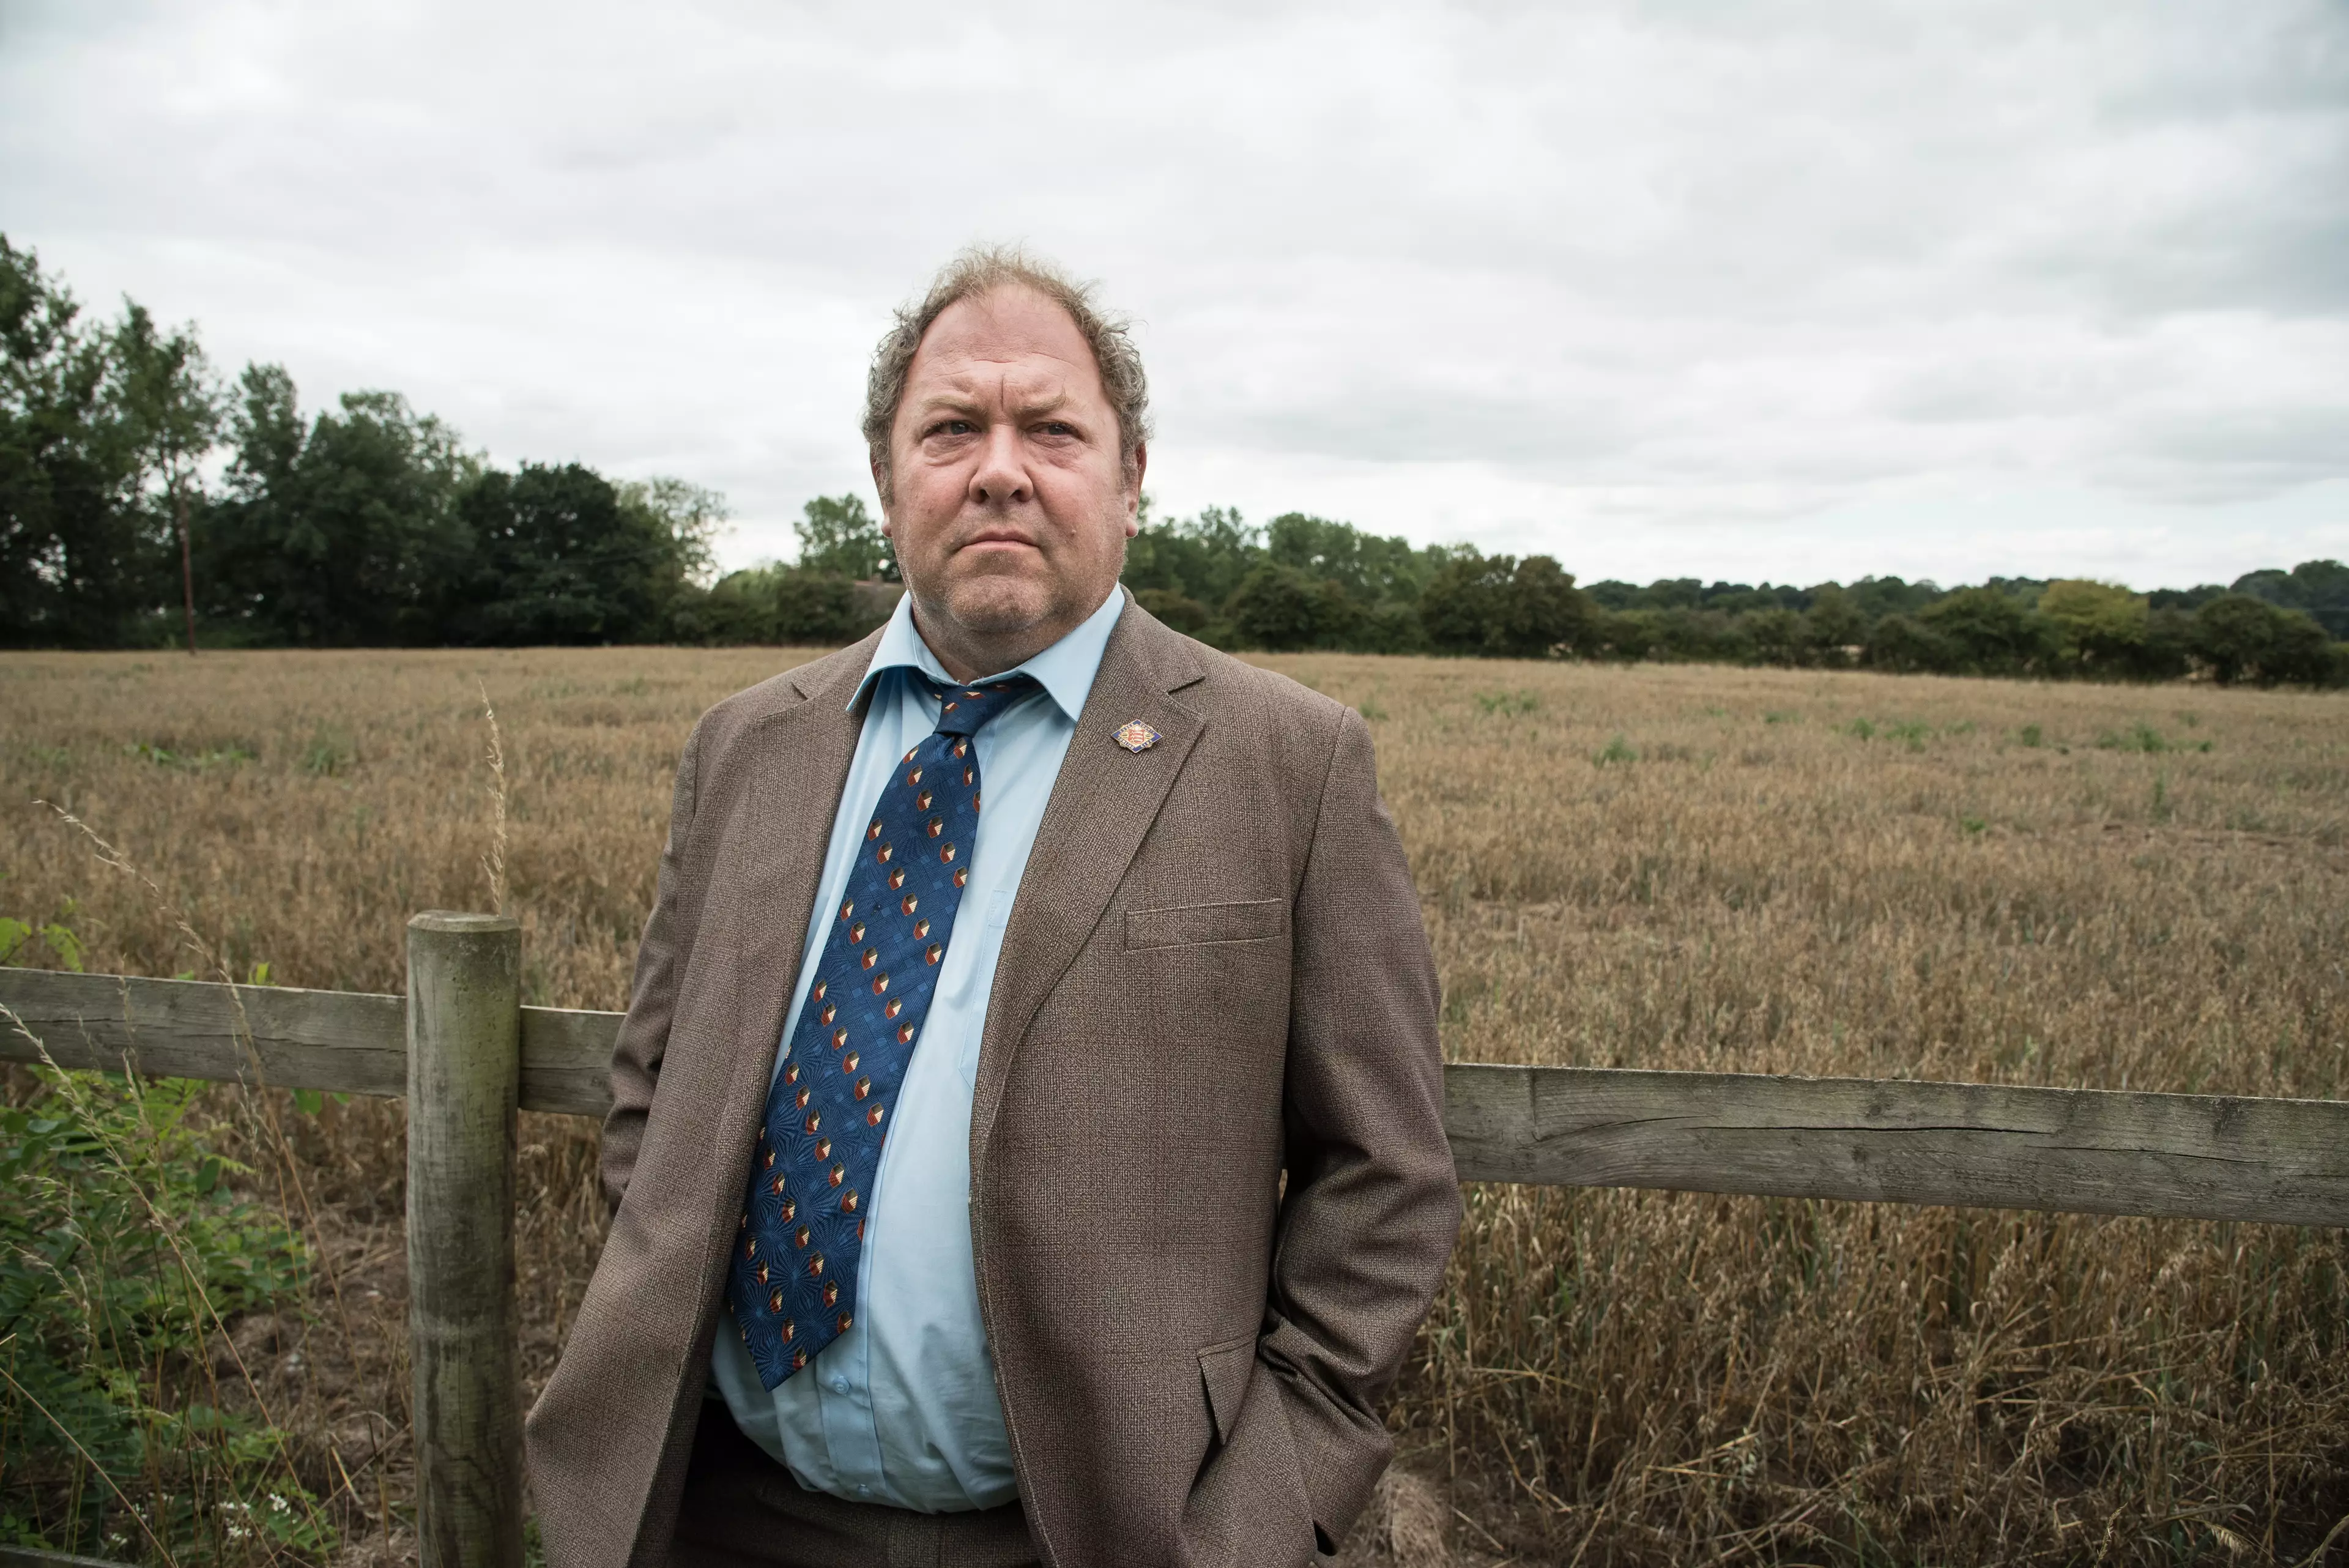 DS Stan Jones, played by Mark Addy, has an uneasy feeling about the route the investigation is taking. (